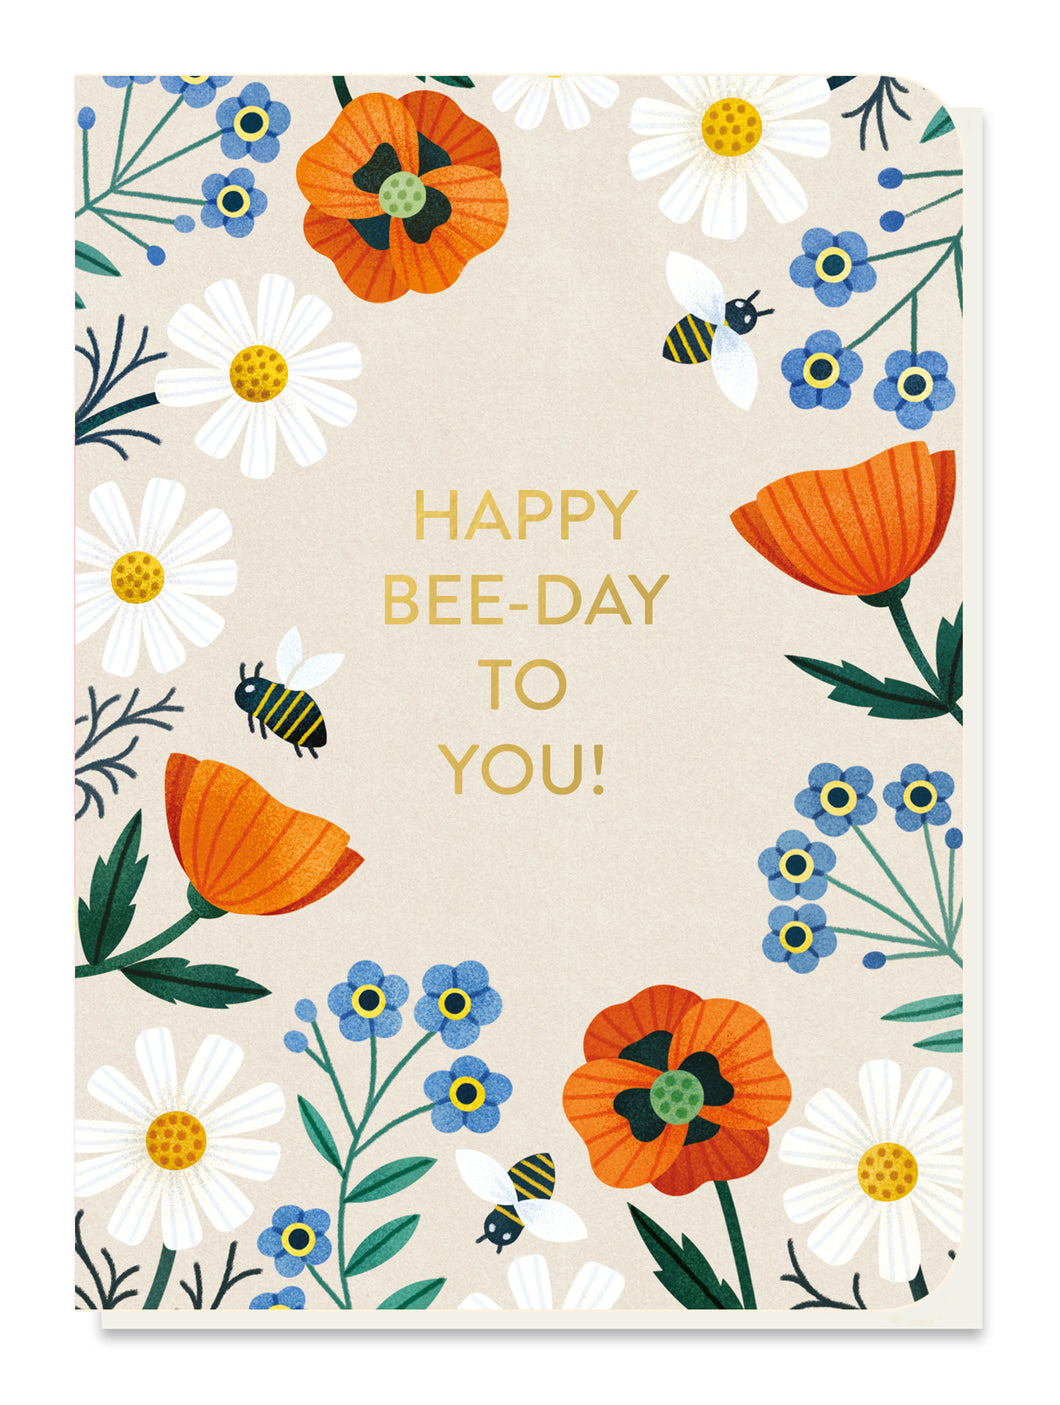 Bee-friendly Birthday Card with seeds